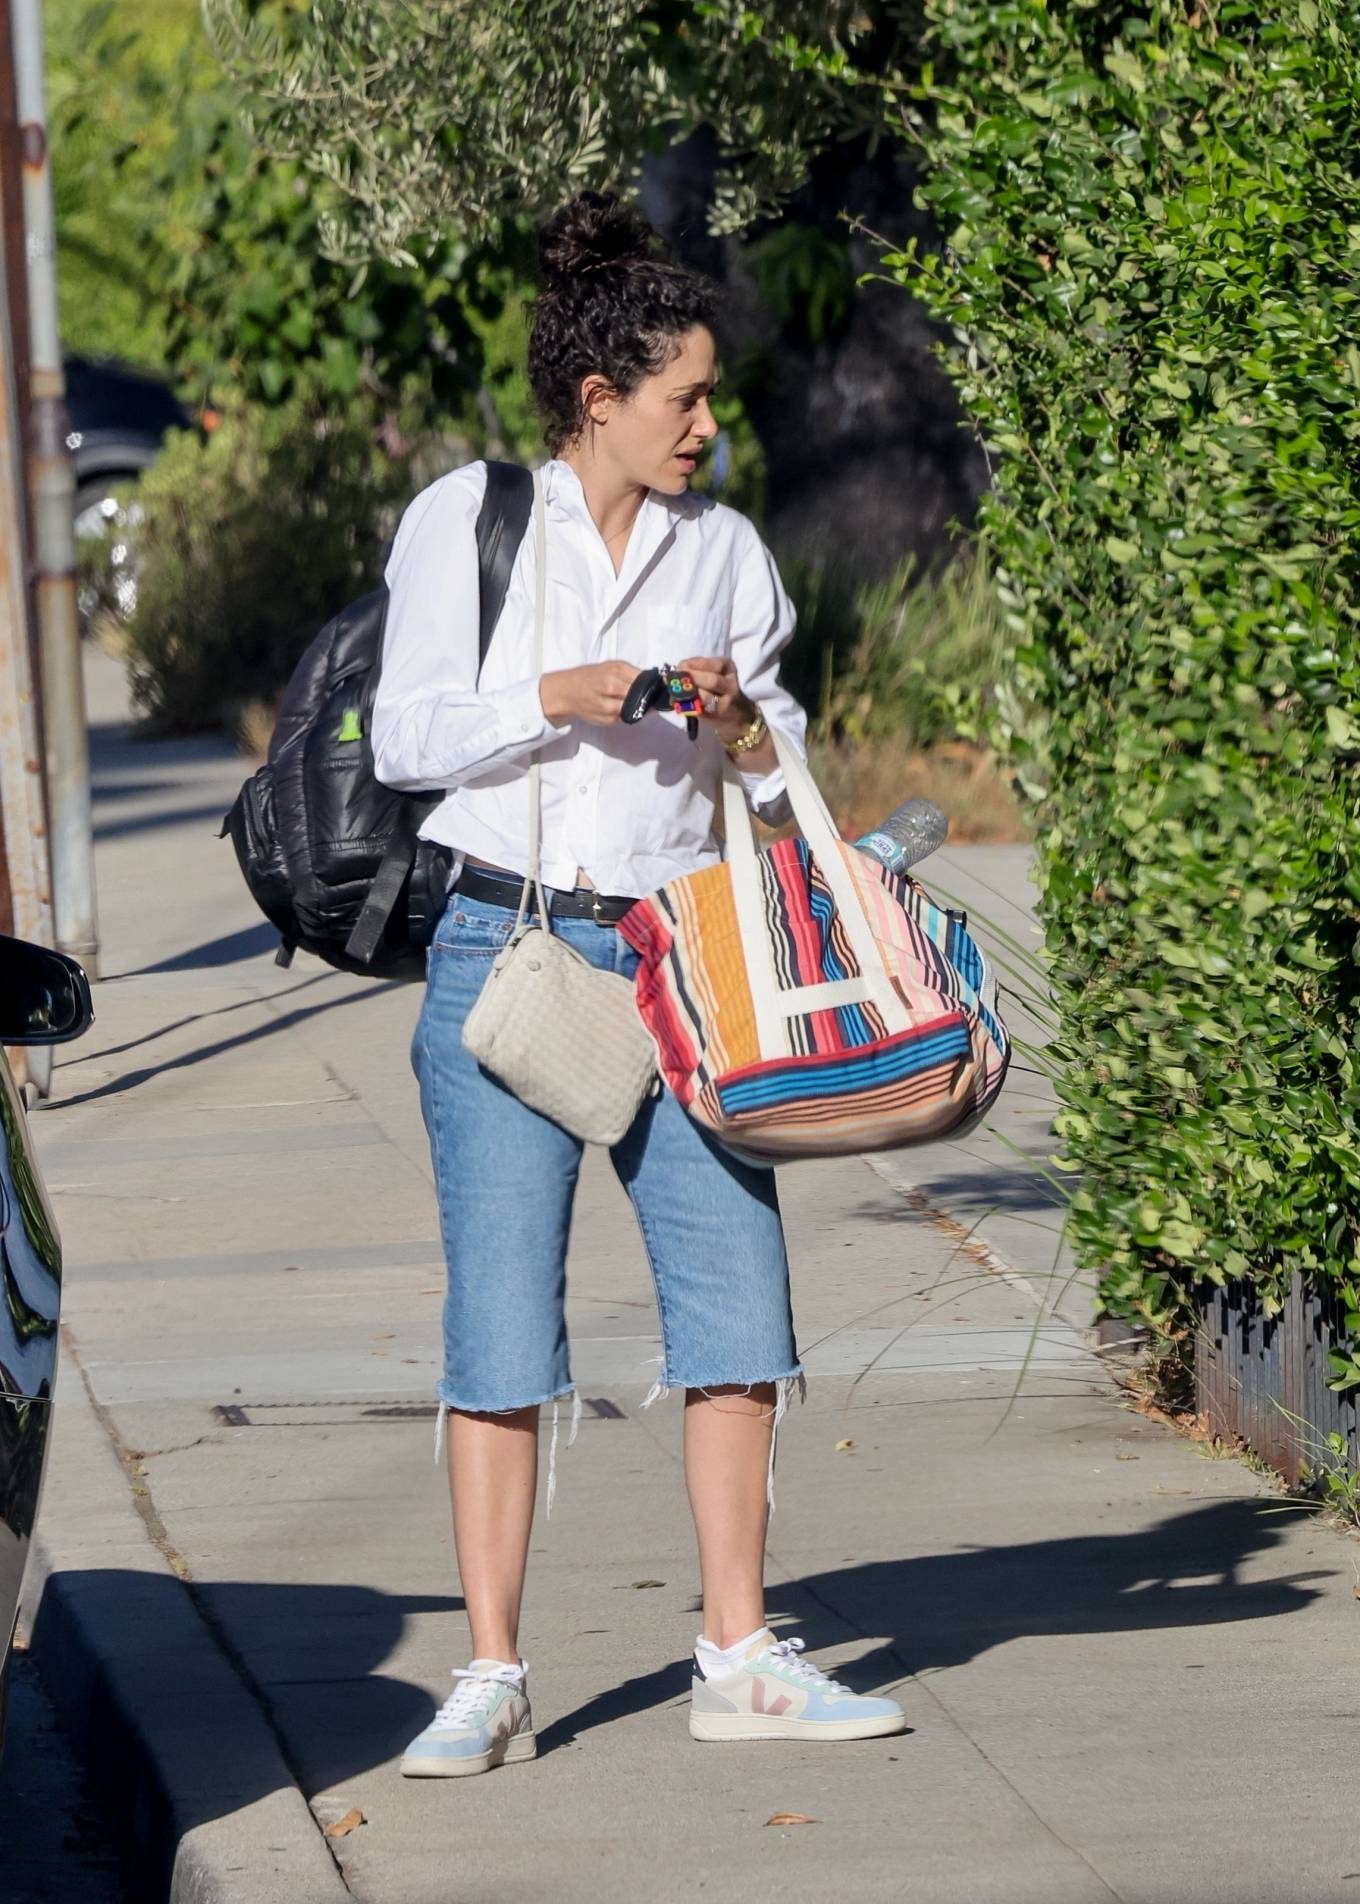 Emmy Rossum - Seen arriving at friends for a visit in Los Angeles